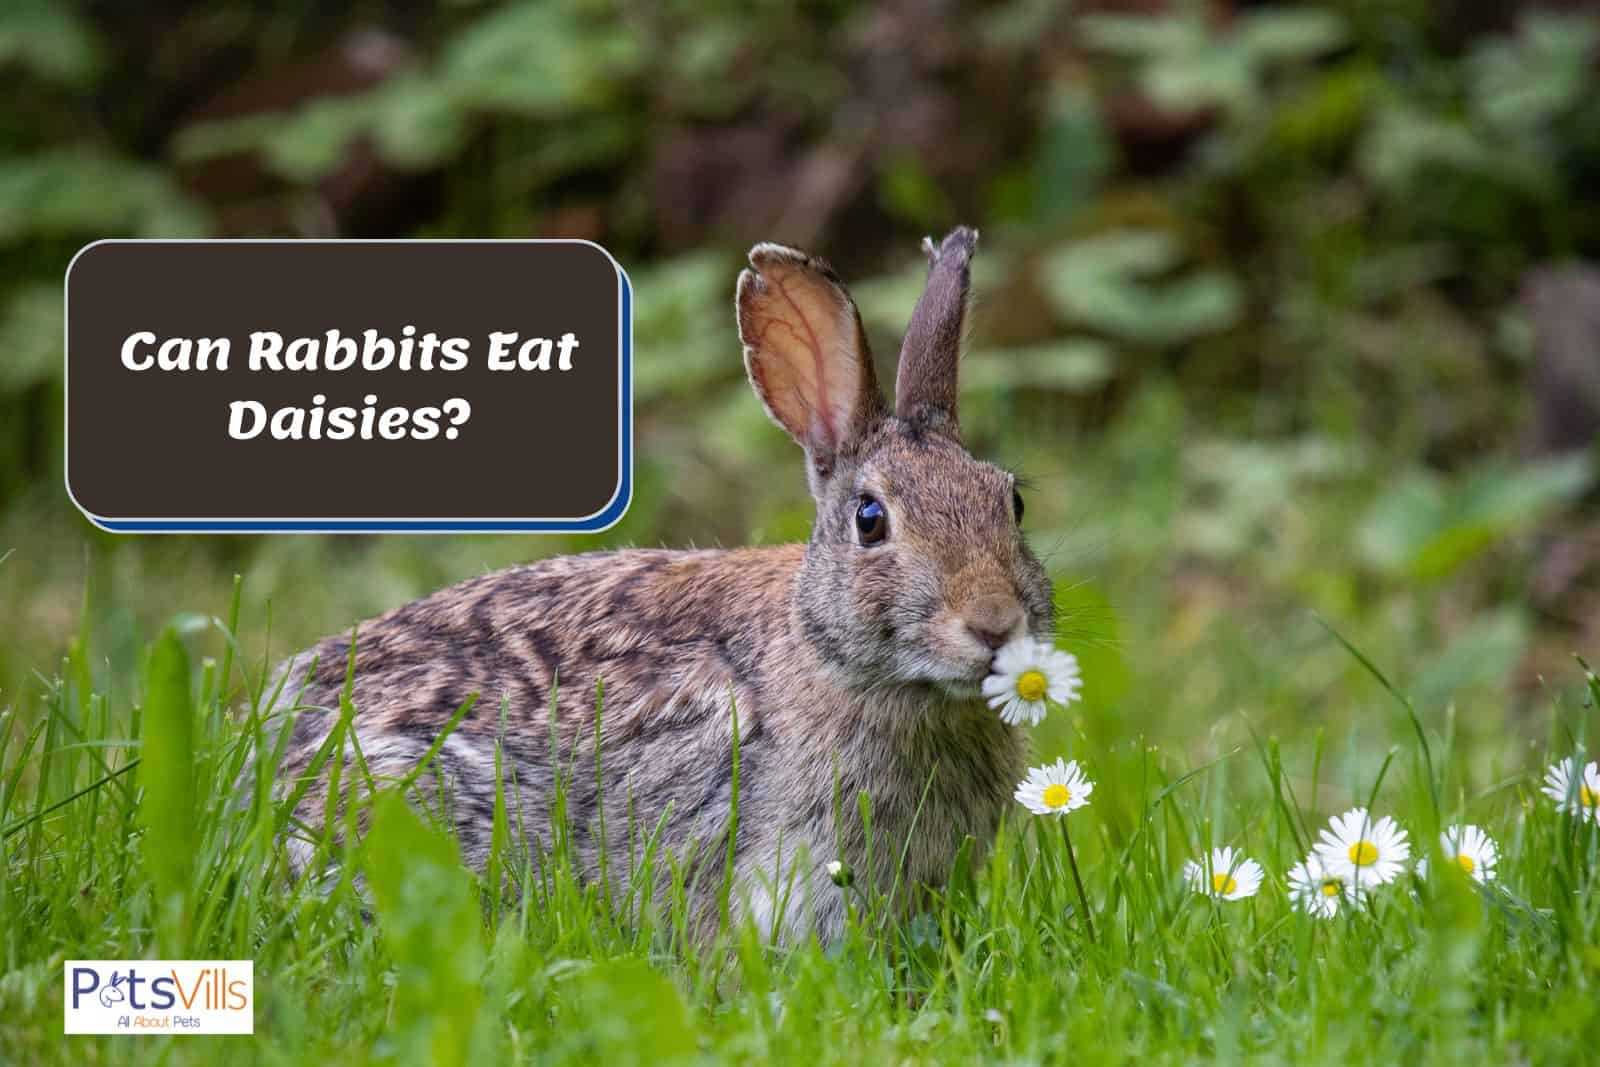 rabbit is trying to eat daisies but can rabbits eat daisies